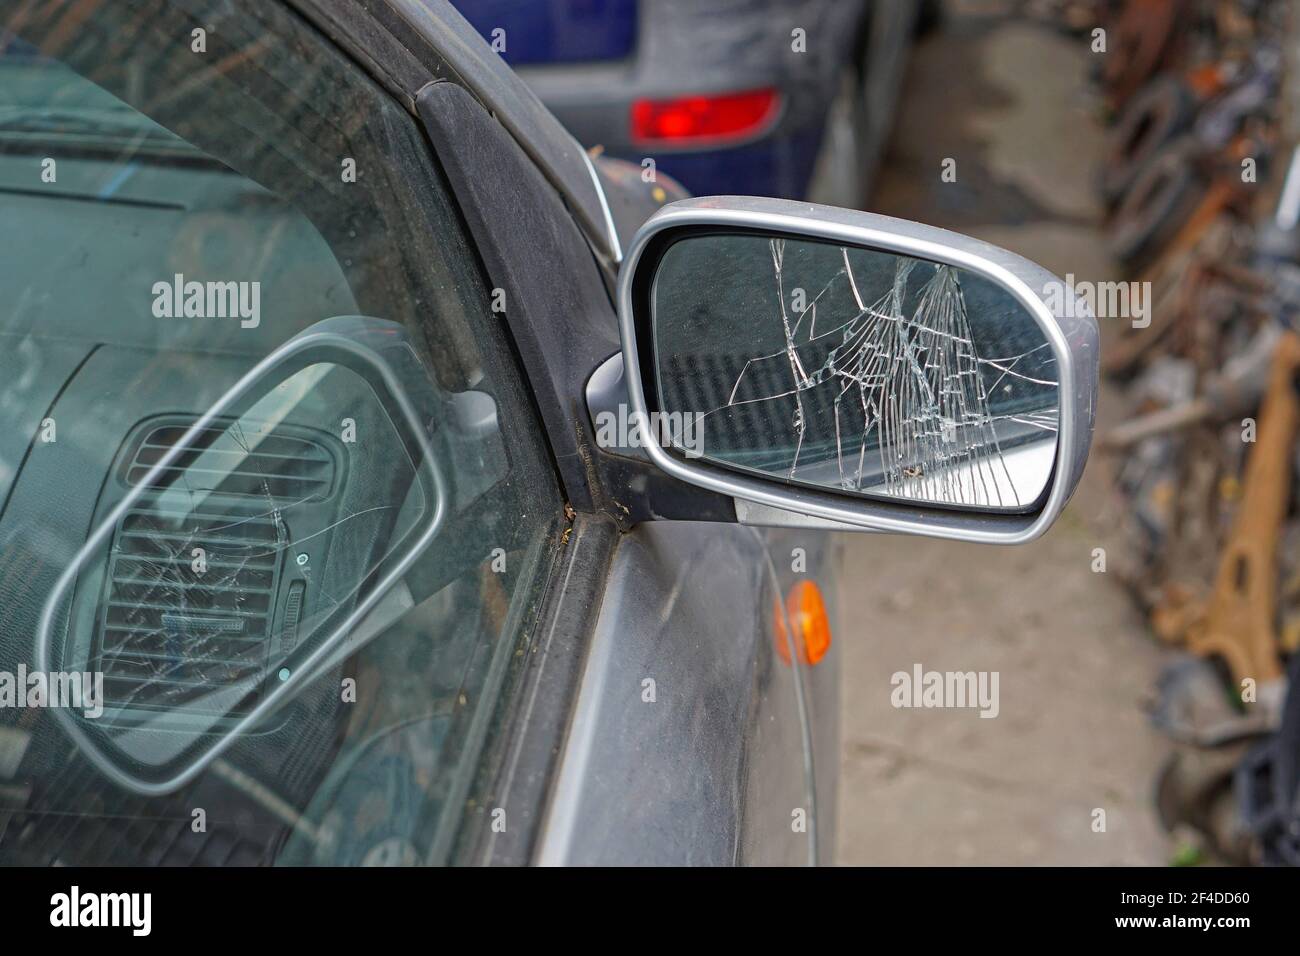 How to replace side mirror glass on your car WITHOUT DAMAGE